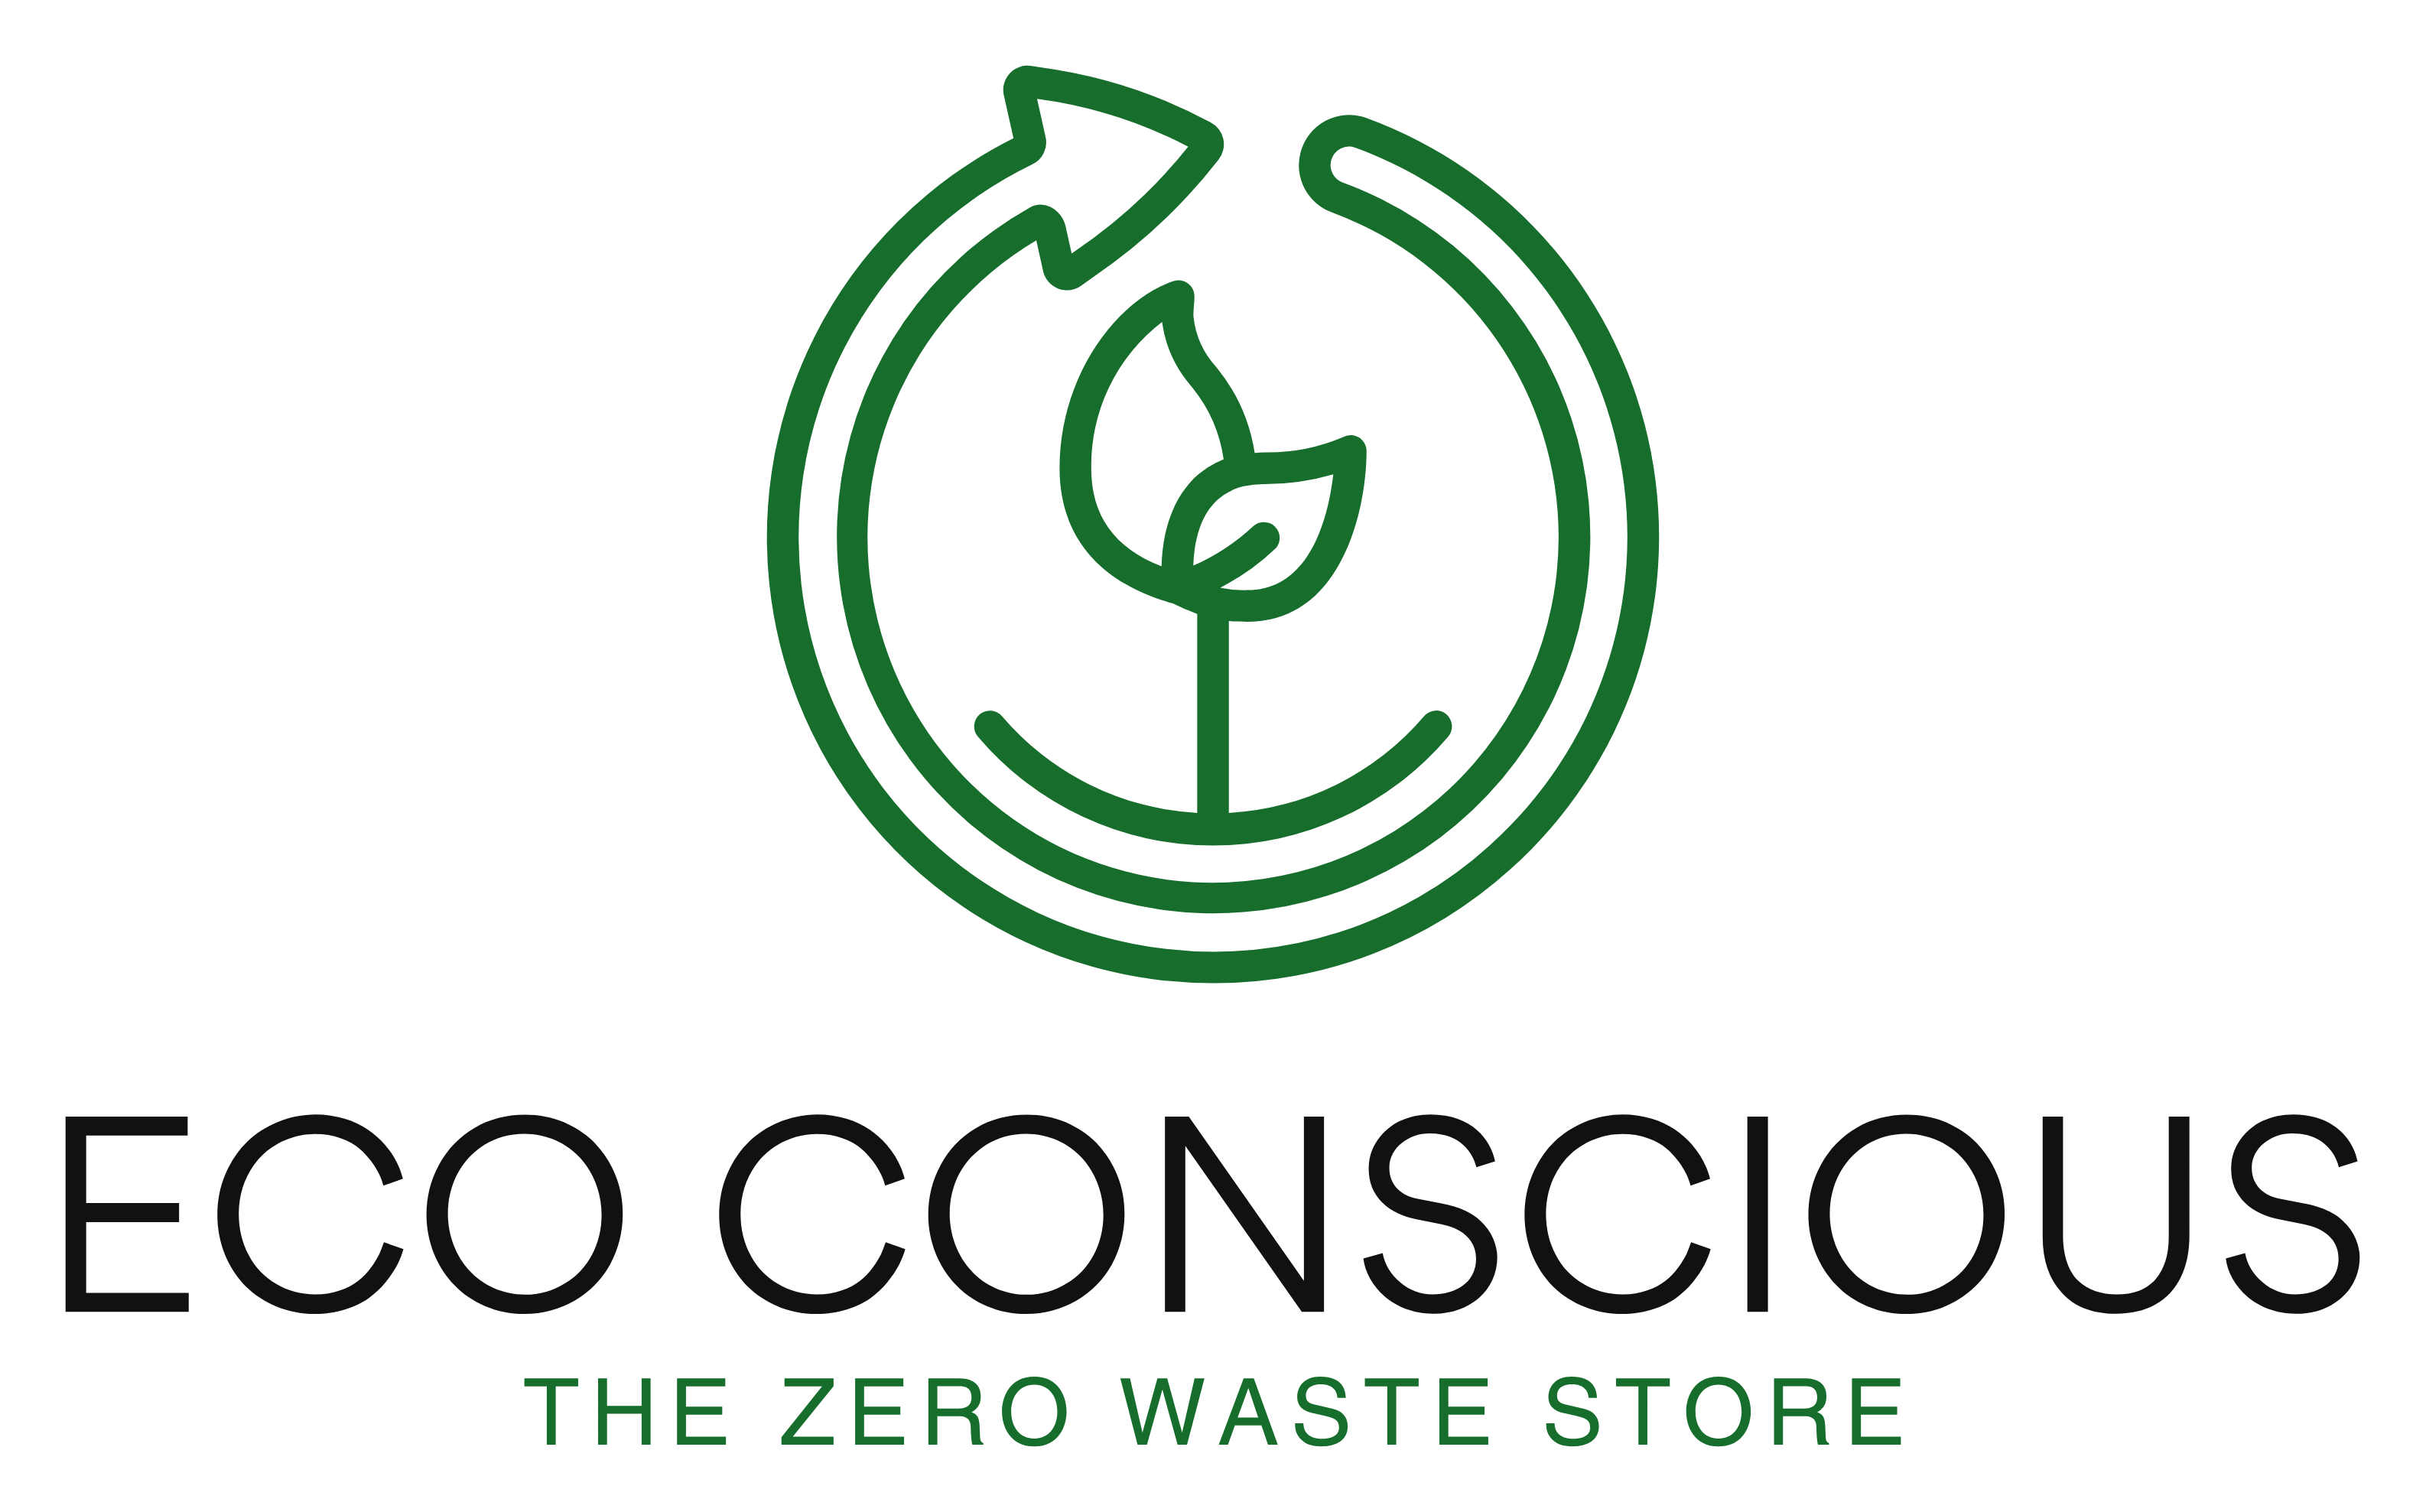 The Eco Conscious Store